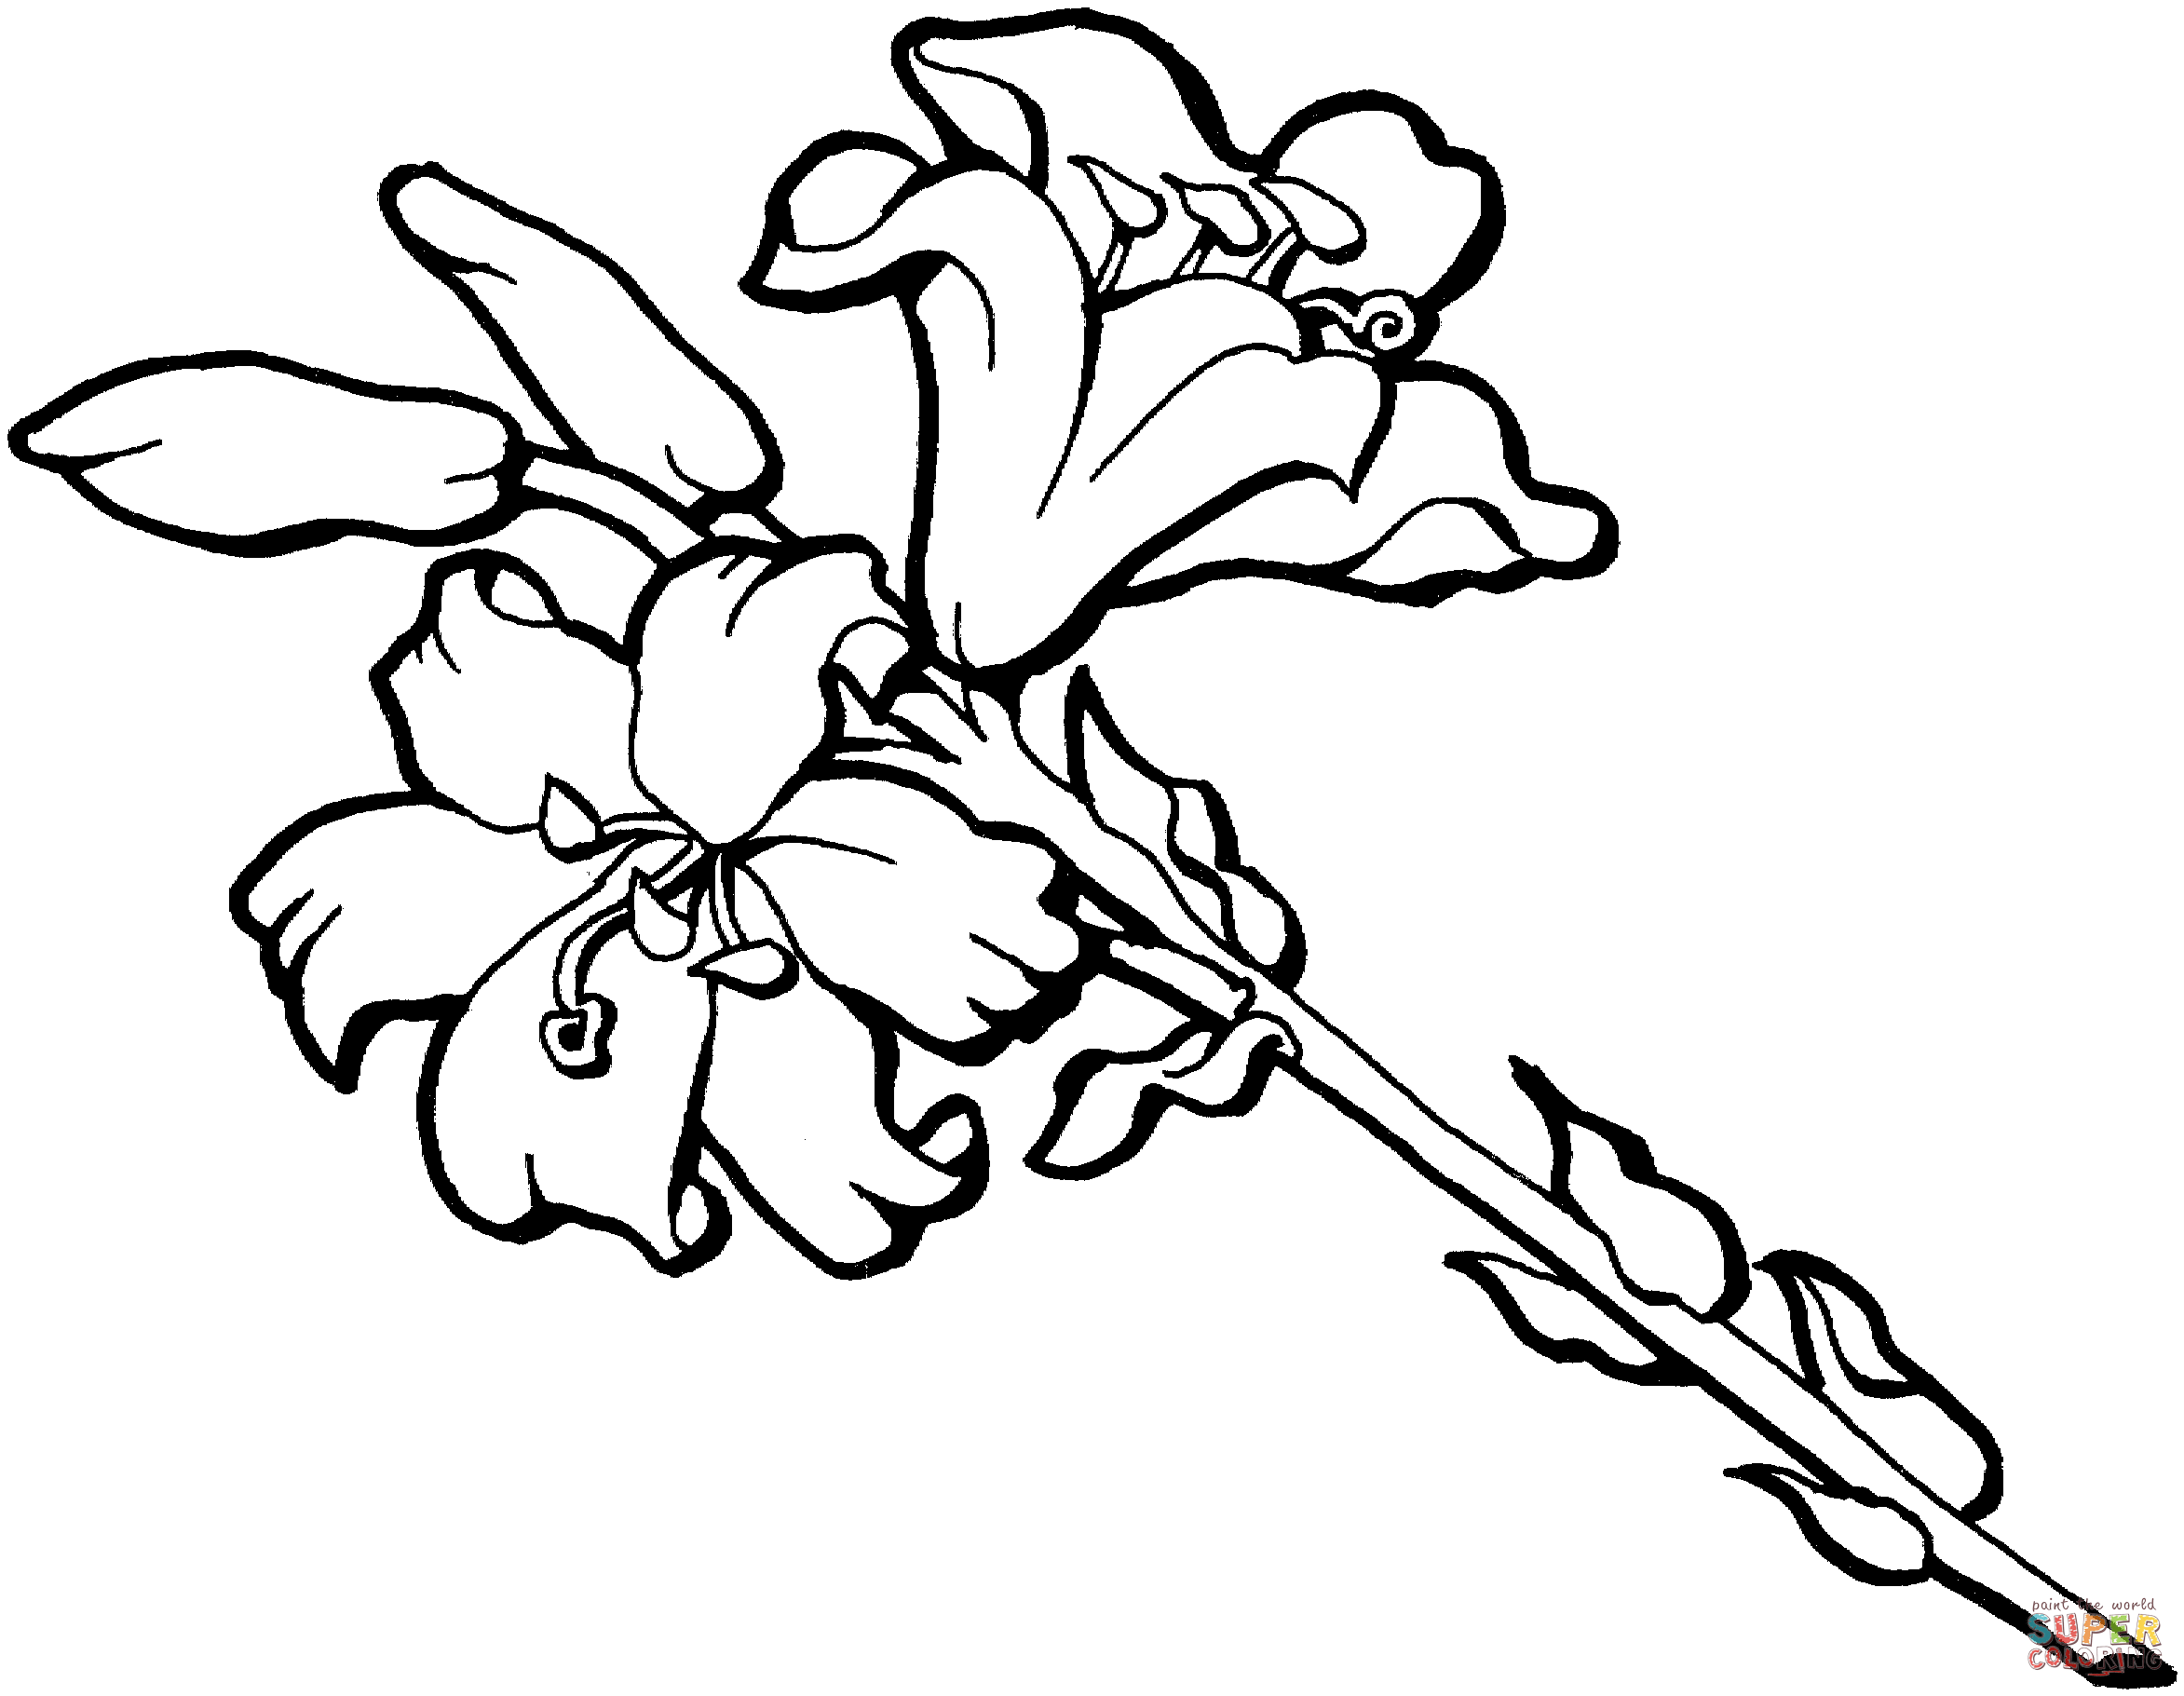 Camellia Blossom coloring page | Free Printable Coloring Pages